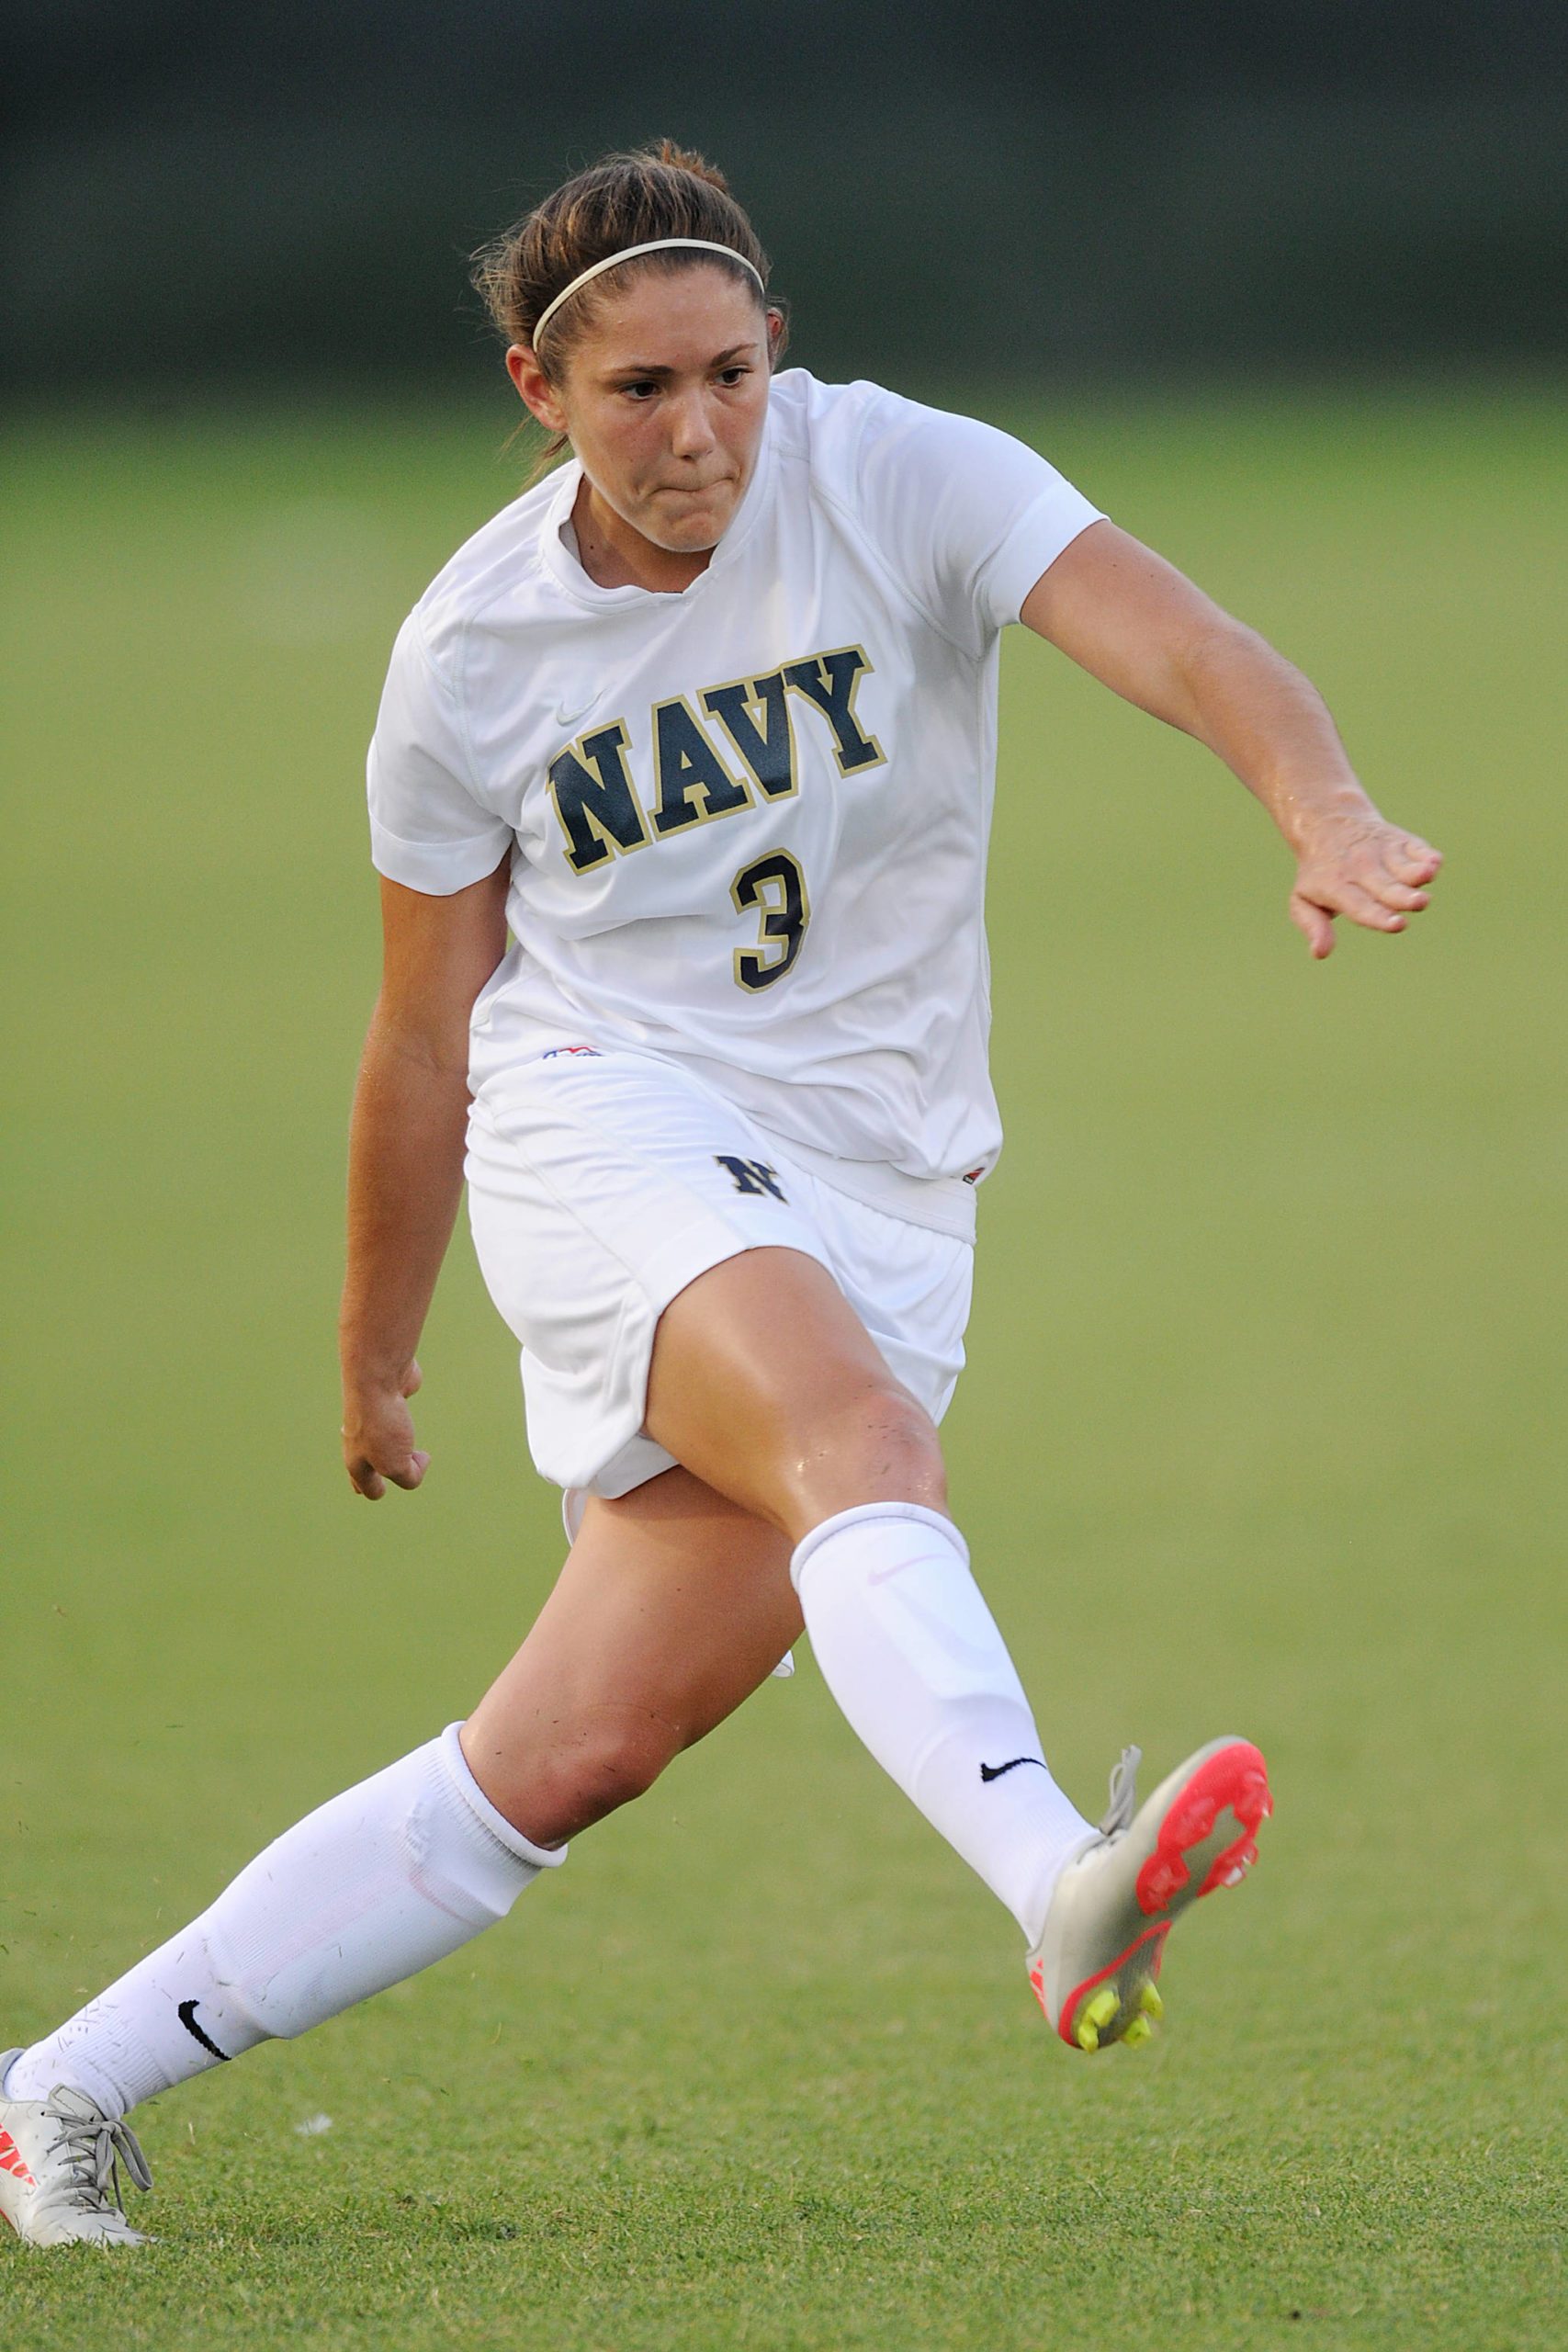 Kate Herren was an all-league player and captain in soccer at the U.S. Naval Academy. COURTESY PHOTO, Phil Hoffmann/Navy Athletics